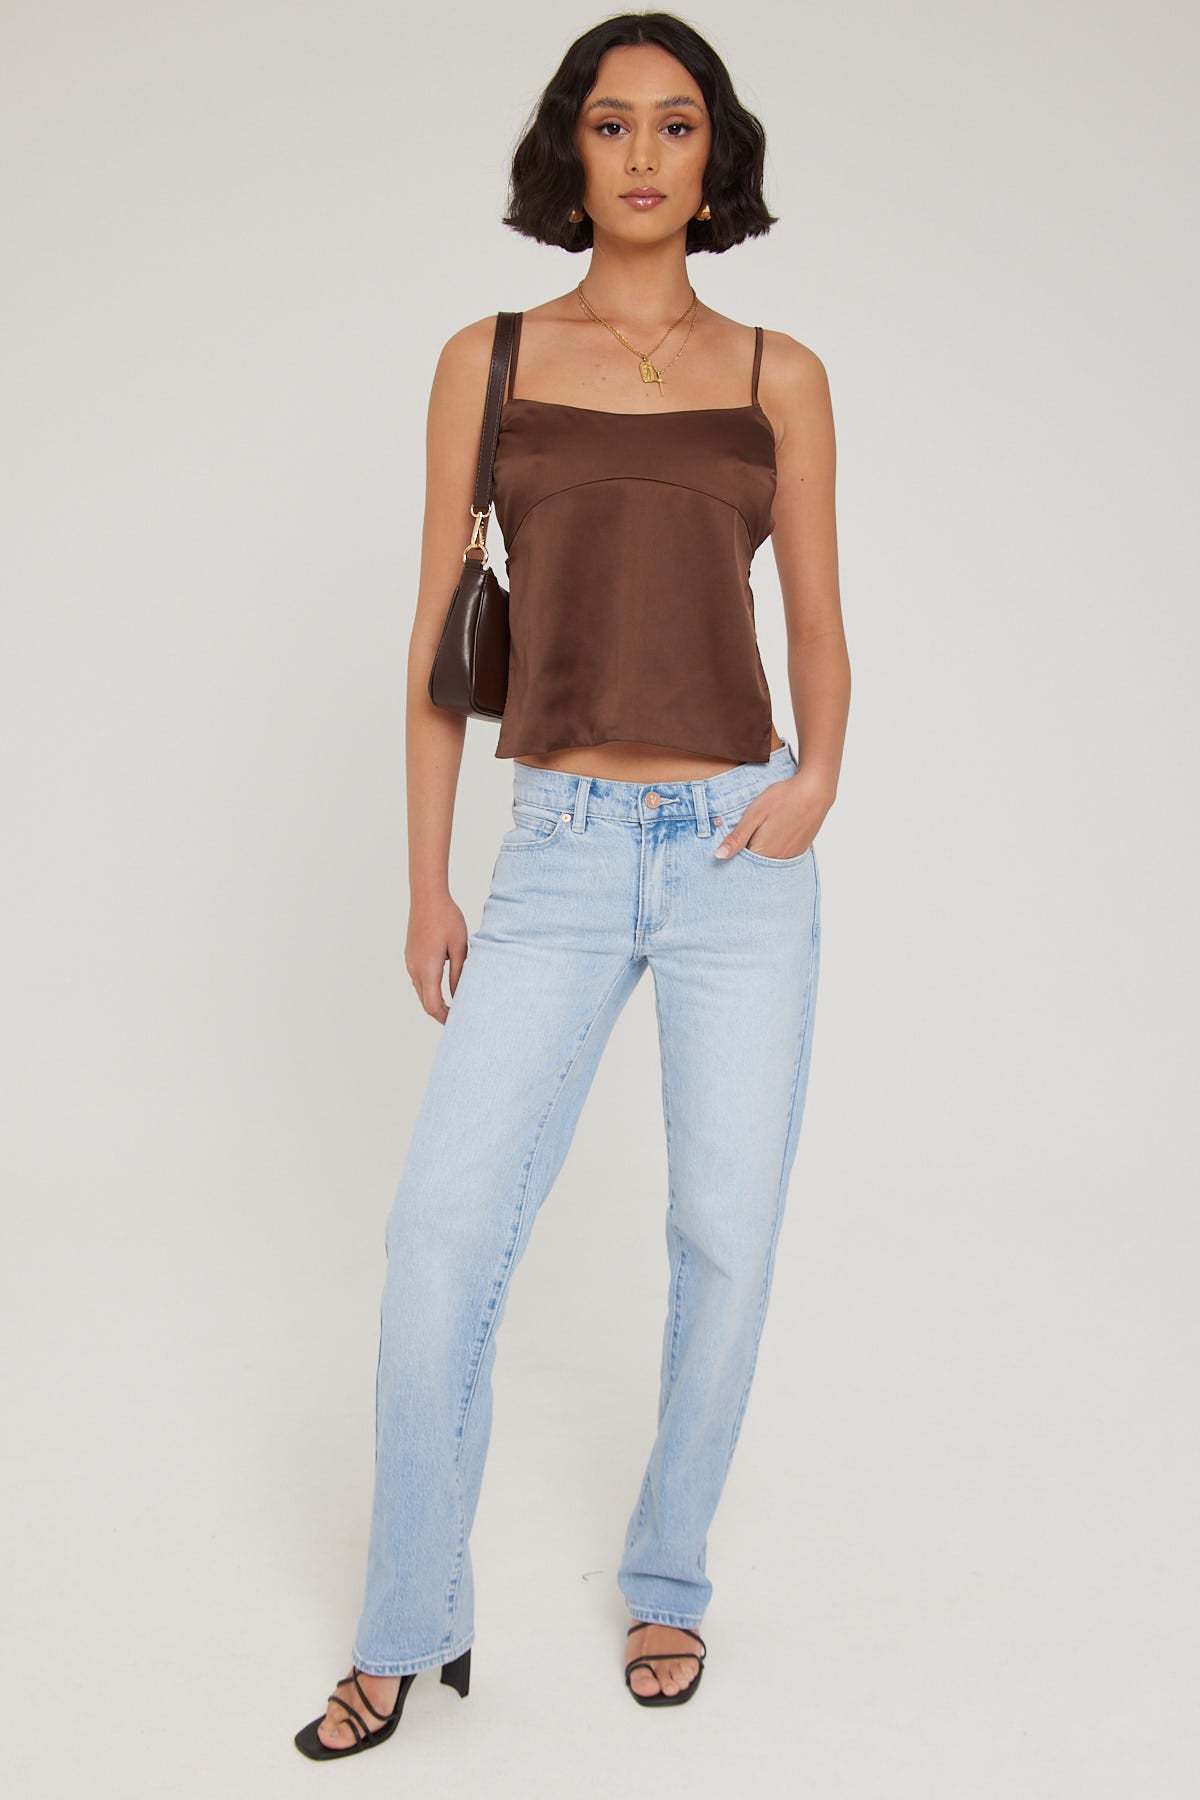 Luck & Trouble BRIAR LACE UP BACK TOP Brown